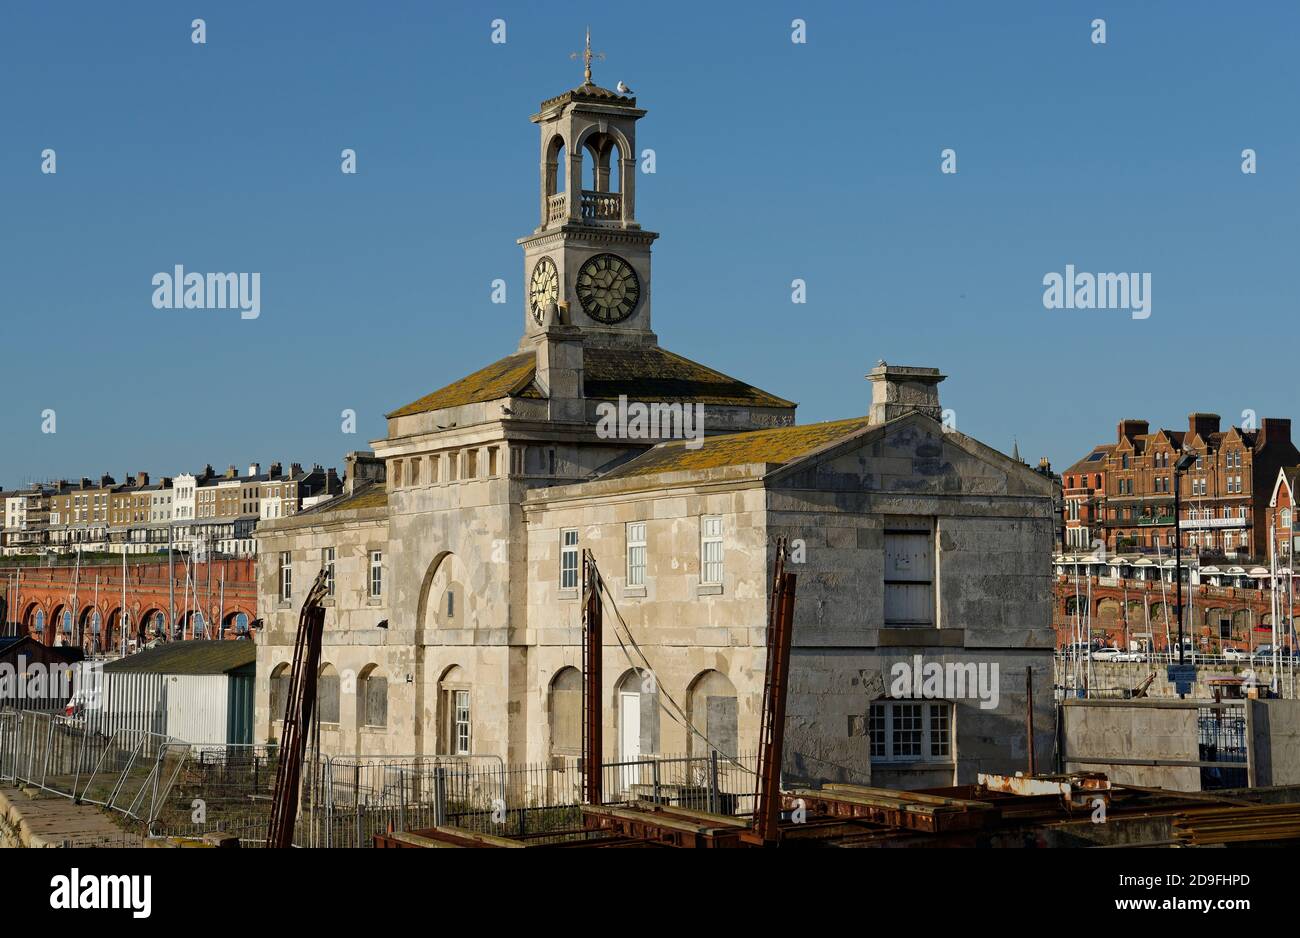 The Royal Harbour at Ramsgate in Kent. A fishing port on the Isle of Thanet, part of the county of Kent, UK. Stock Photo